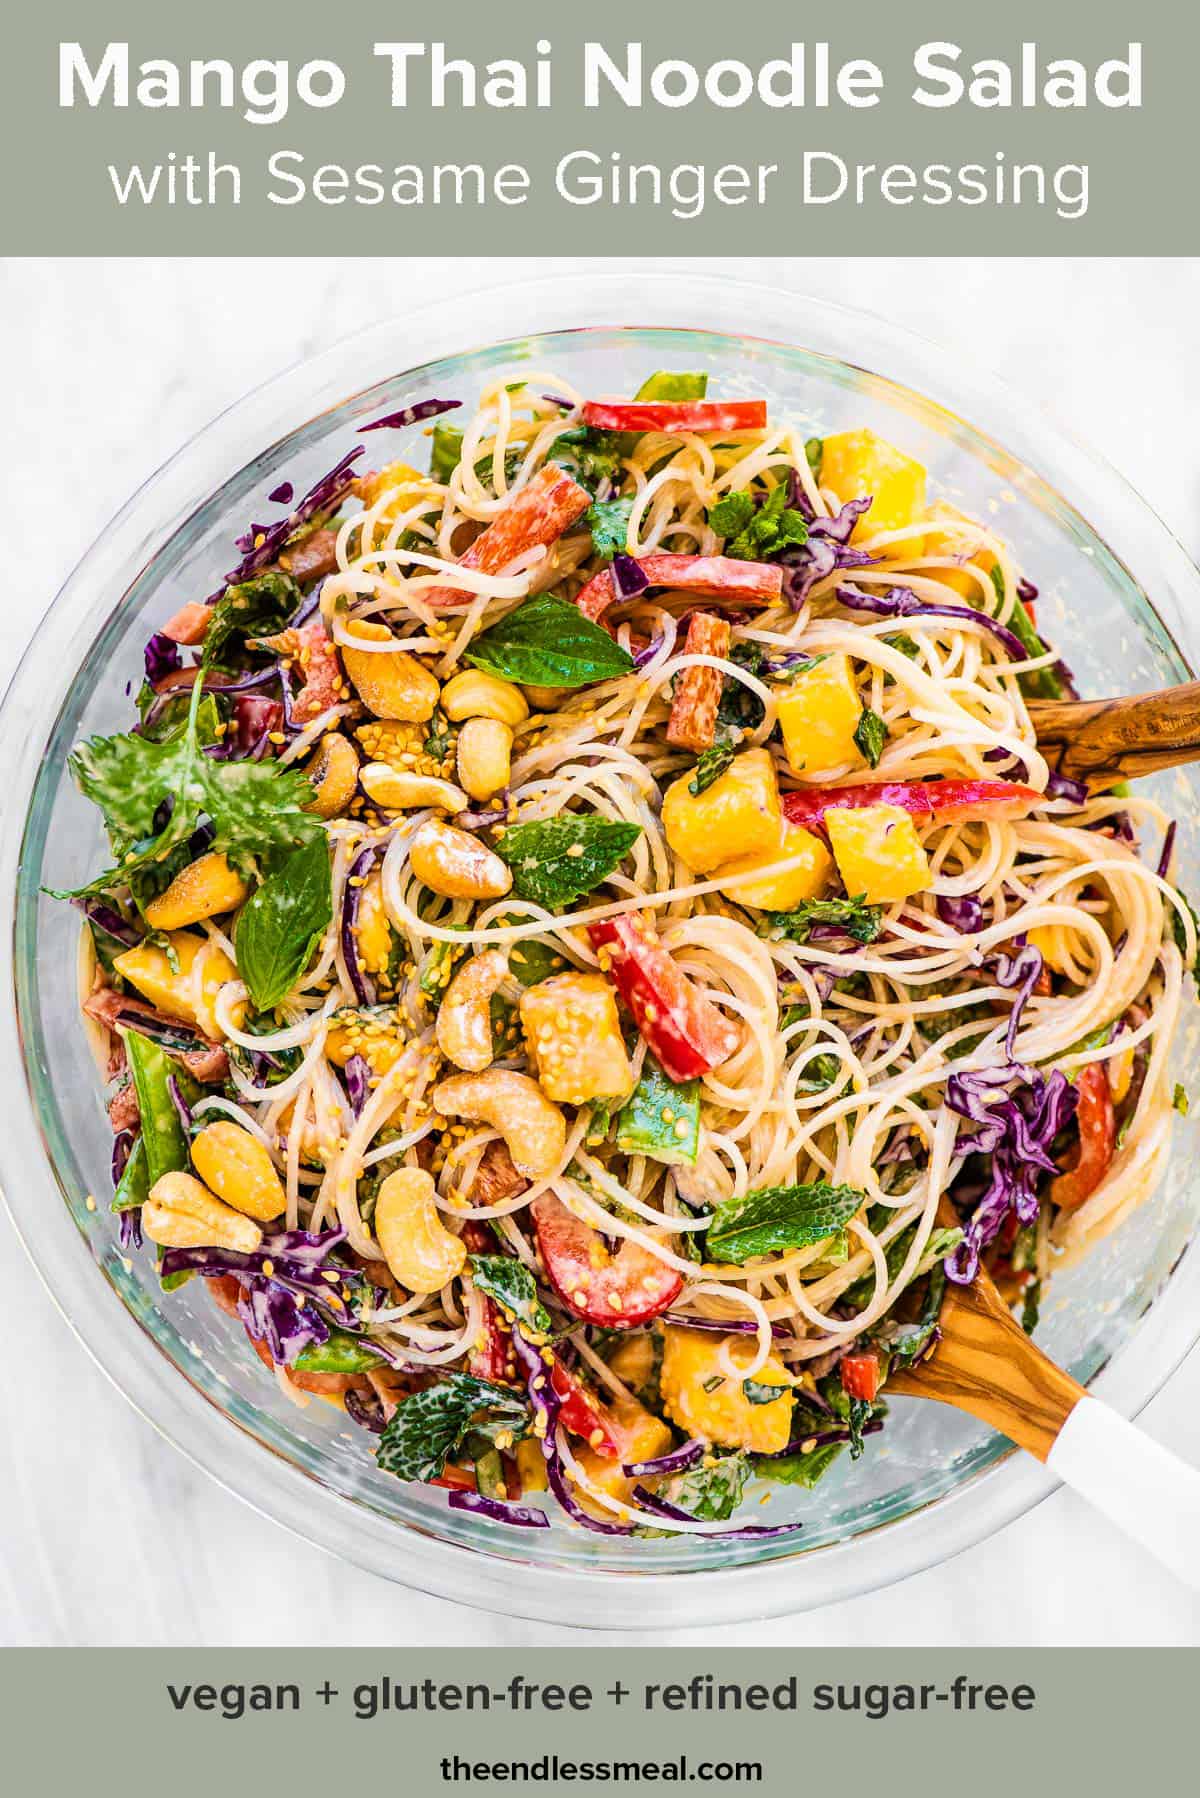 Thai noodle salad in a bowl with lots of mangos and red peppers.